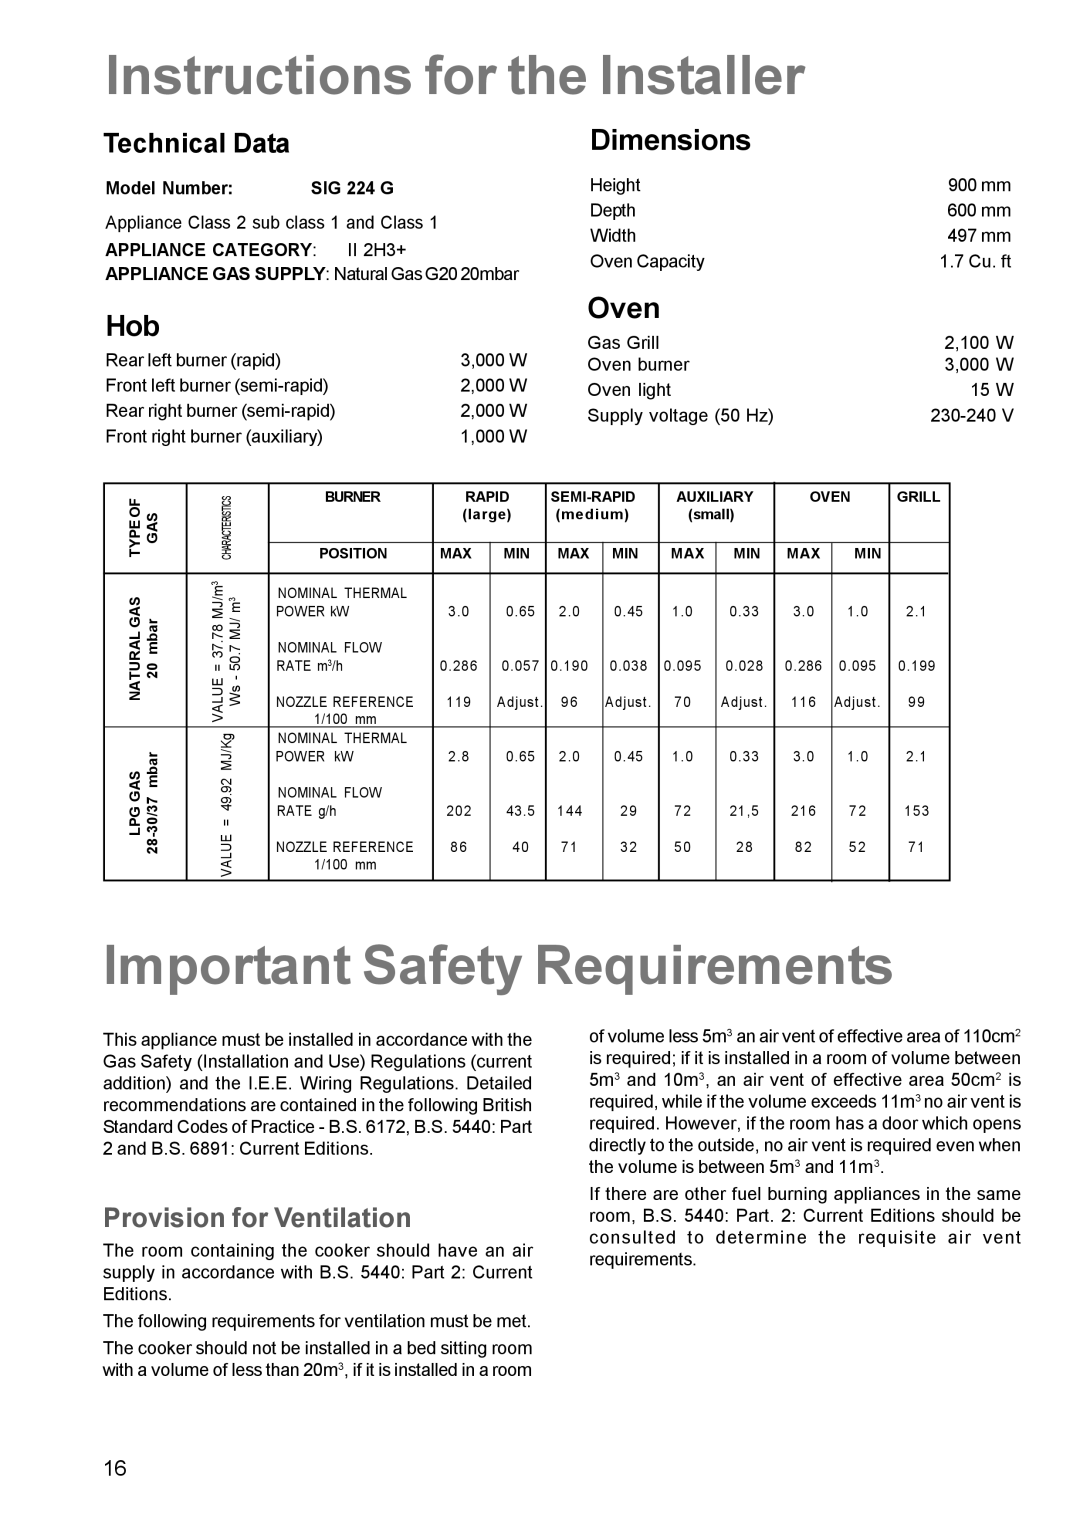 Electrolux SIG 224 G manual Instructions for the Installer, Important Safety Requirements, Hob, Dimensions, Oven 